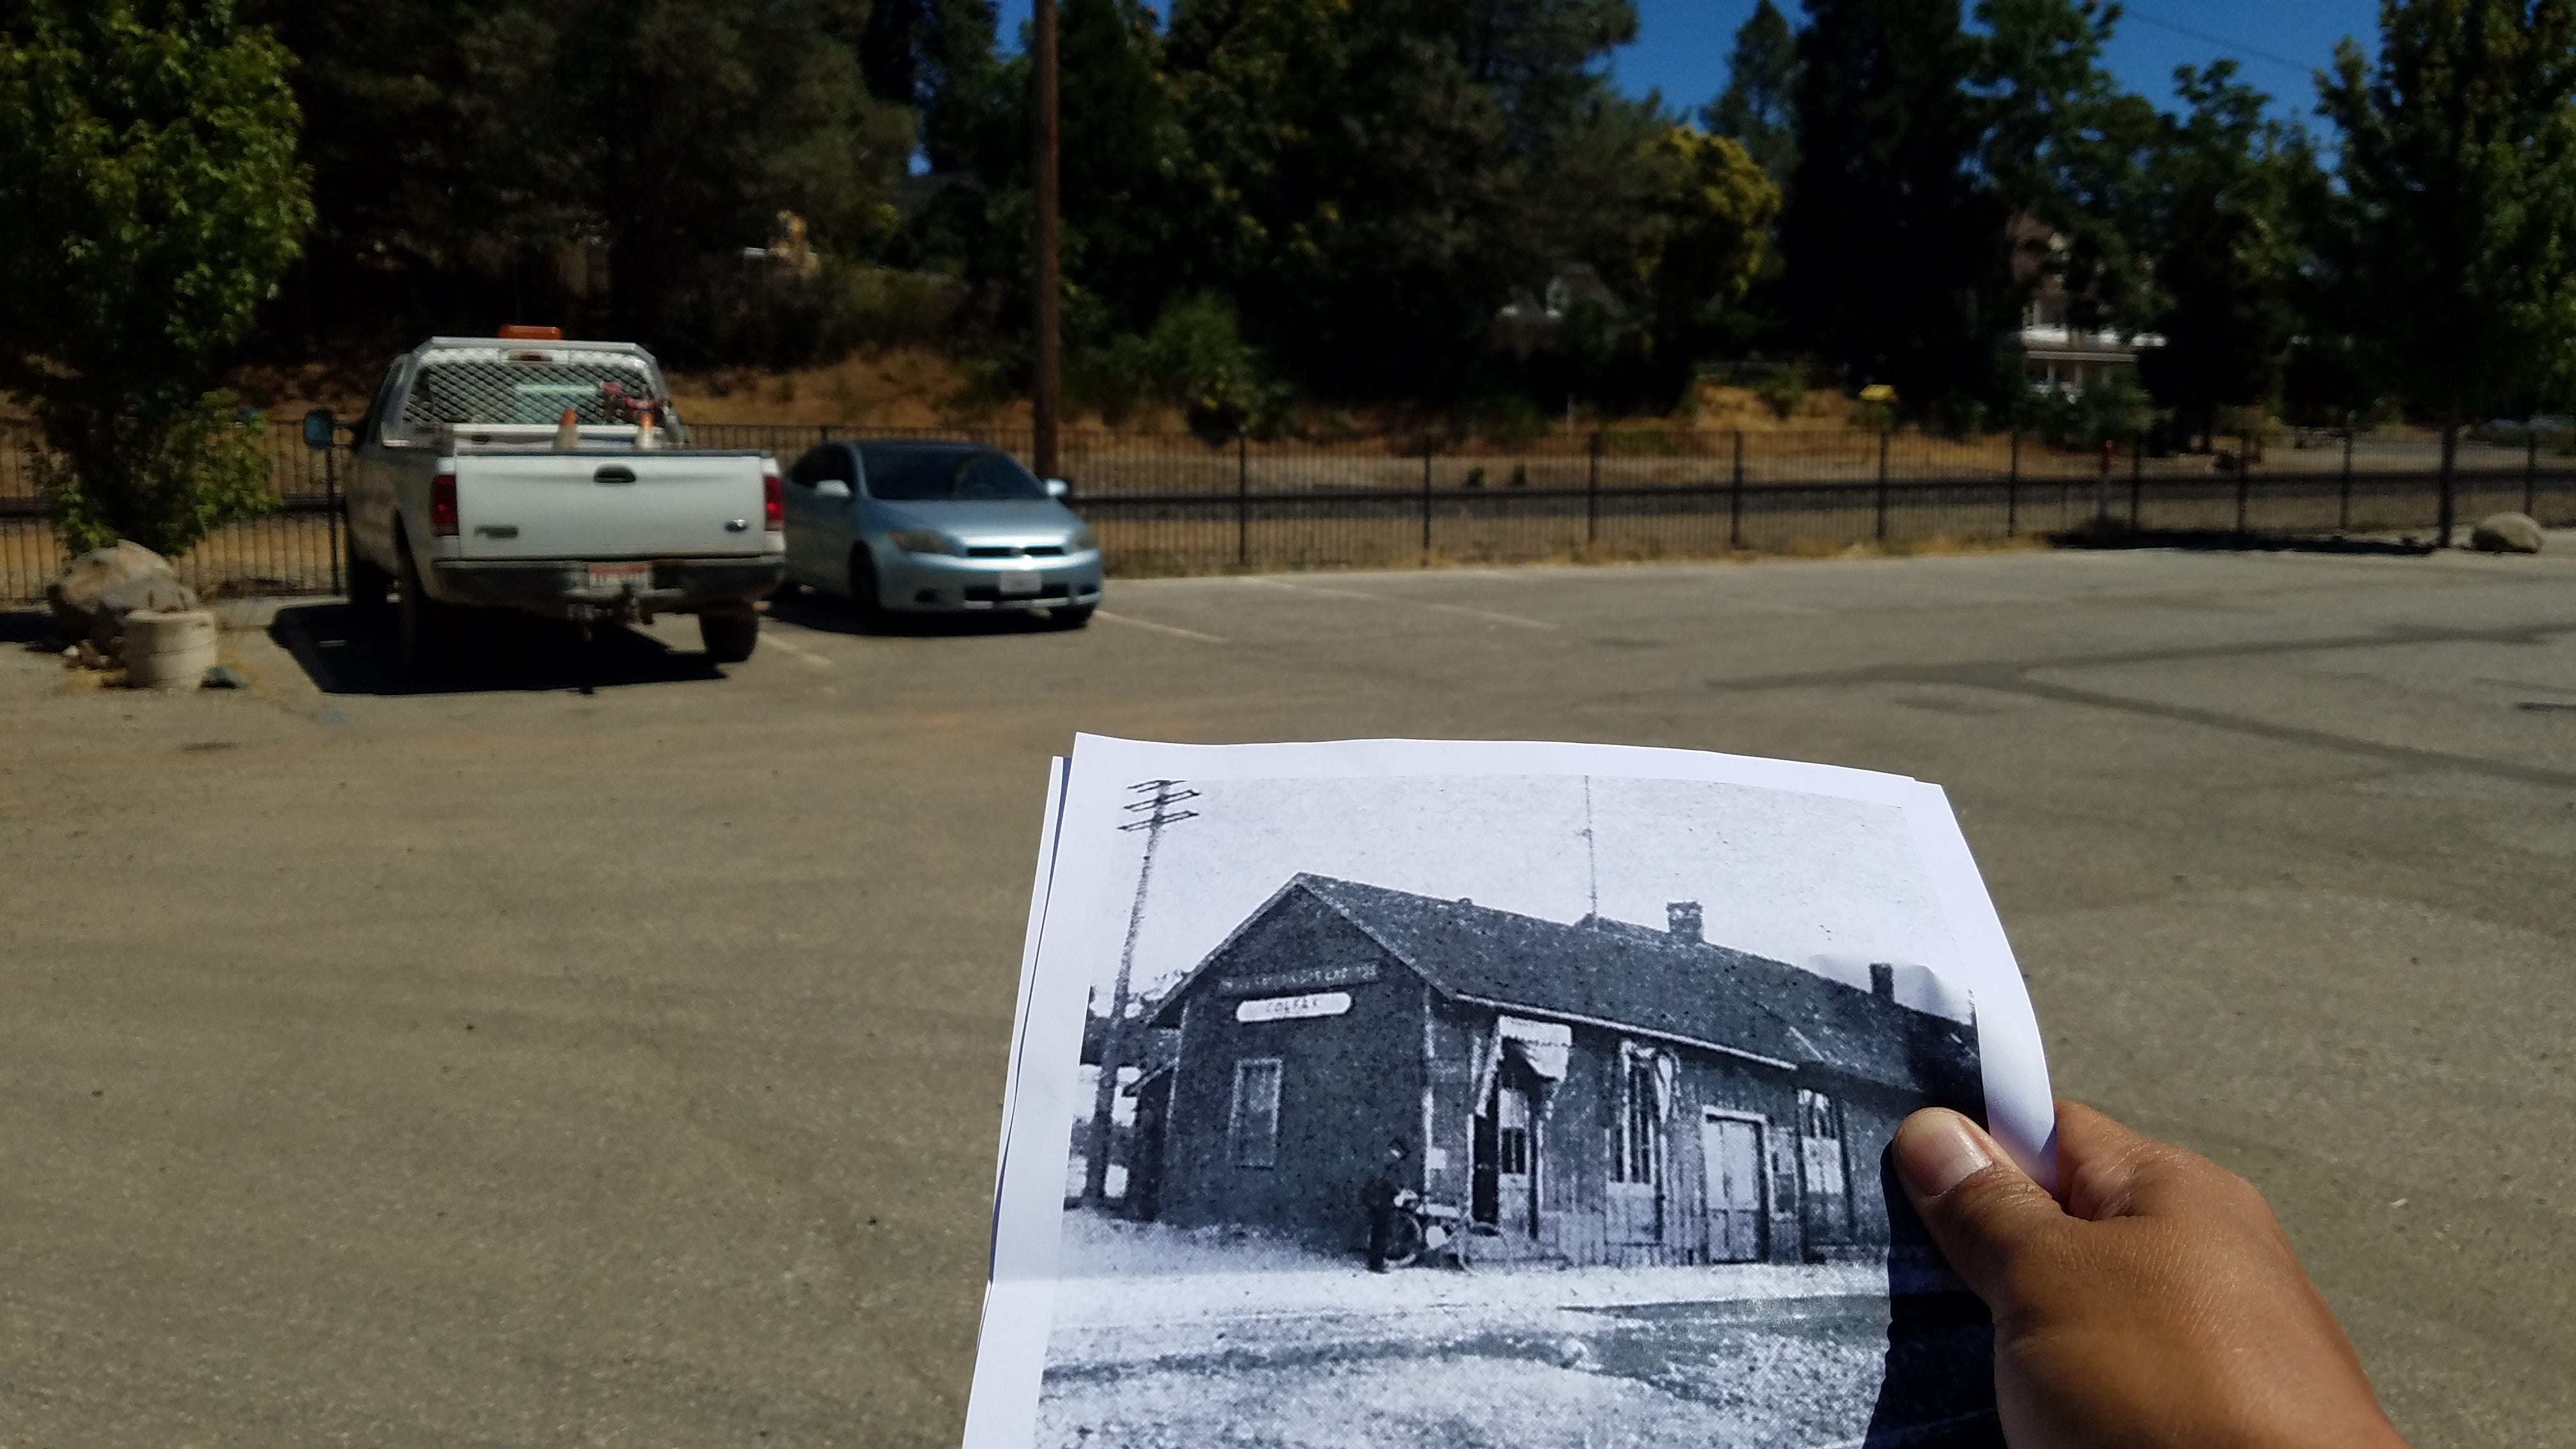 Photo of a parking lot beside railroad tracks. A white pickup and silver sedan are the only two cars present. In the foreground, hand is holding a piece of paper showing an old photo of what the parking lot used to look like. In the photo is an old wooden building with a wooden telephone pole beside it A man has his motor bicycle leaning up against the corner of the building. That is George Wyman.